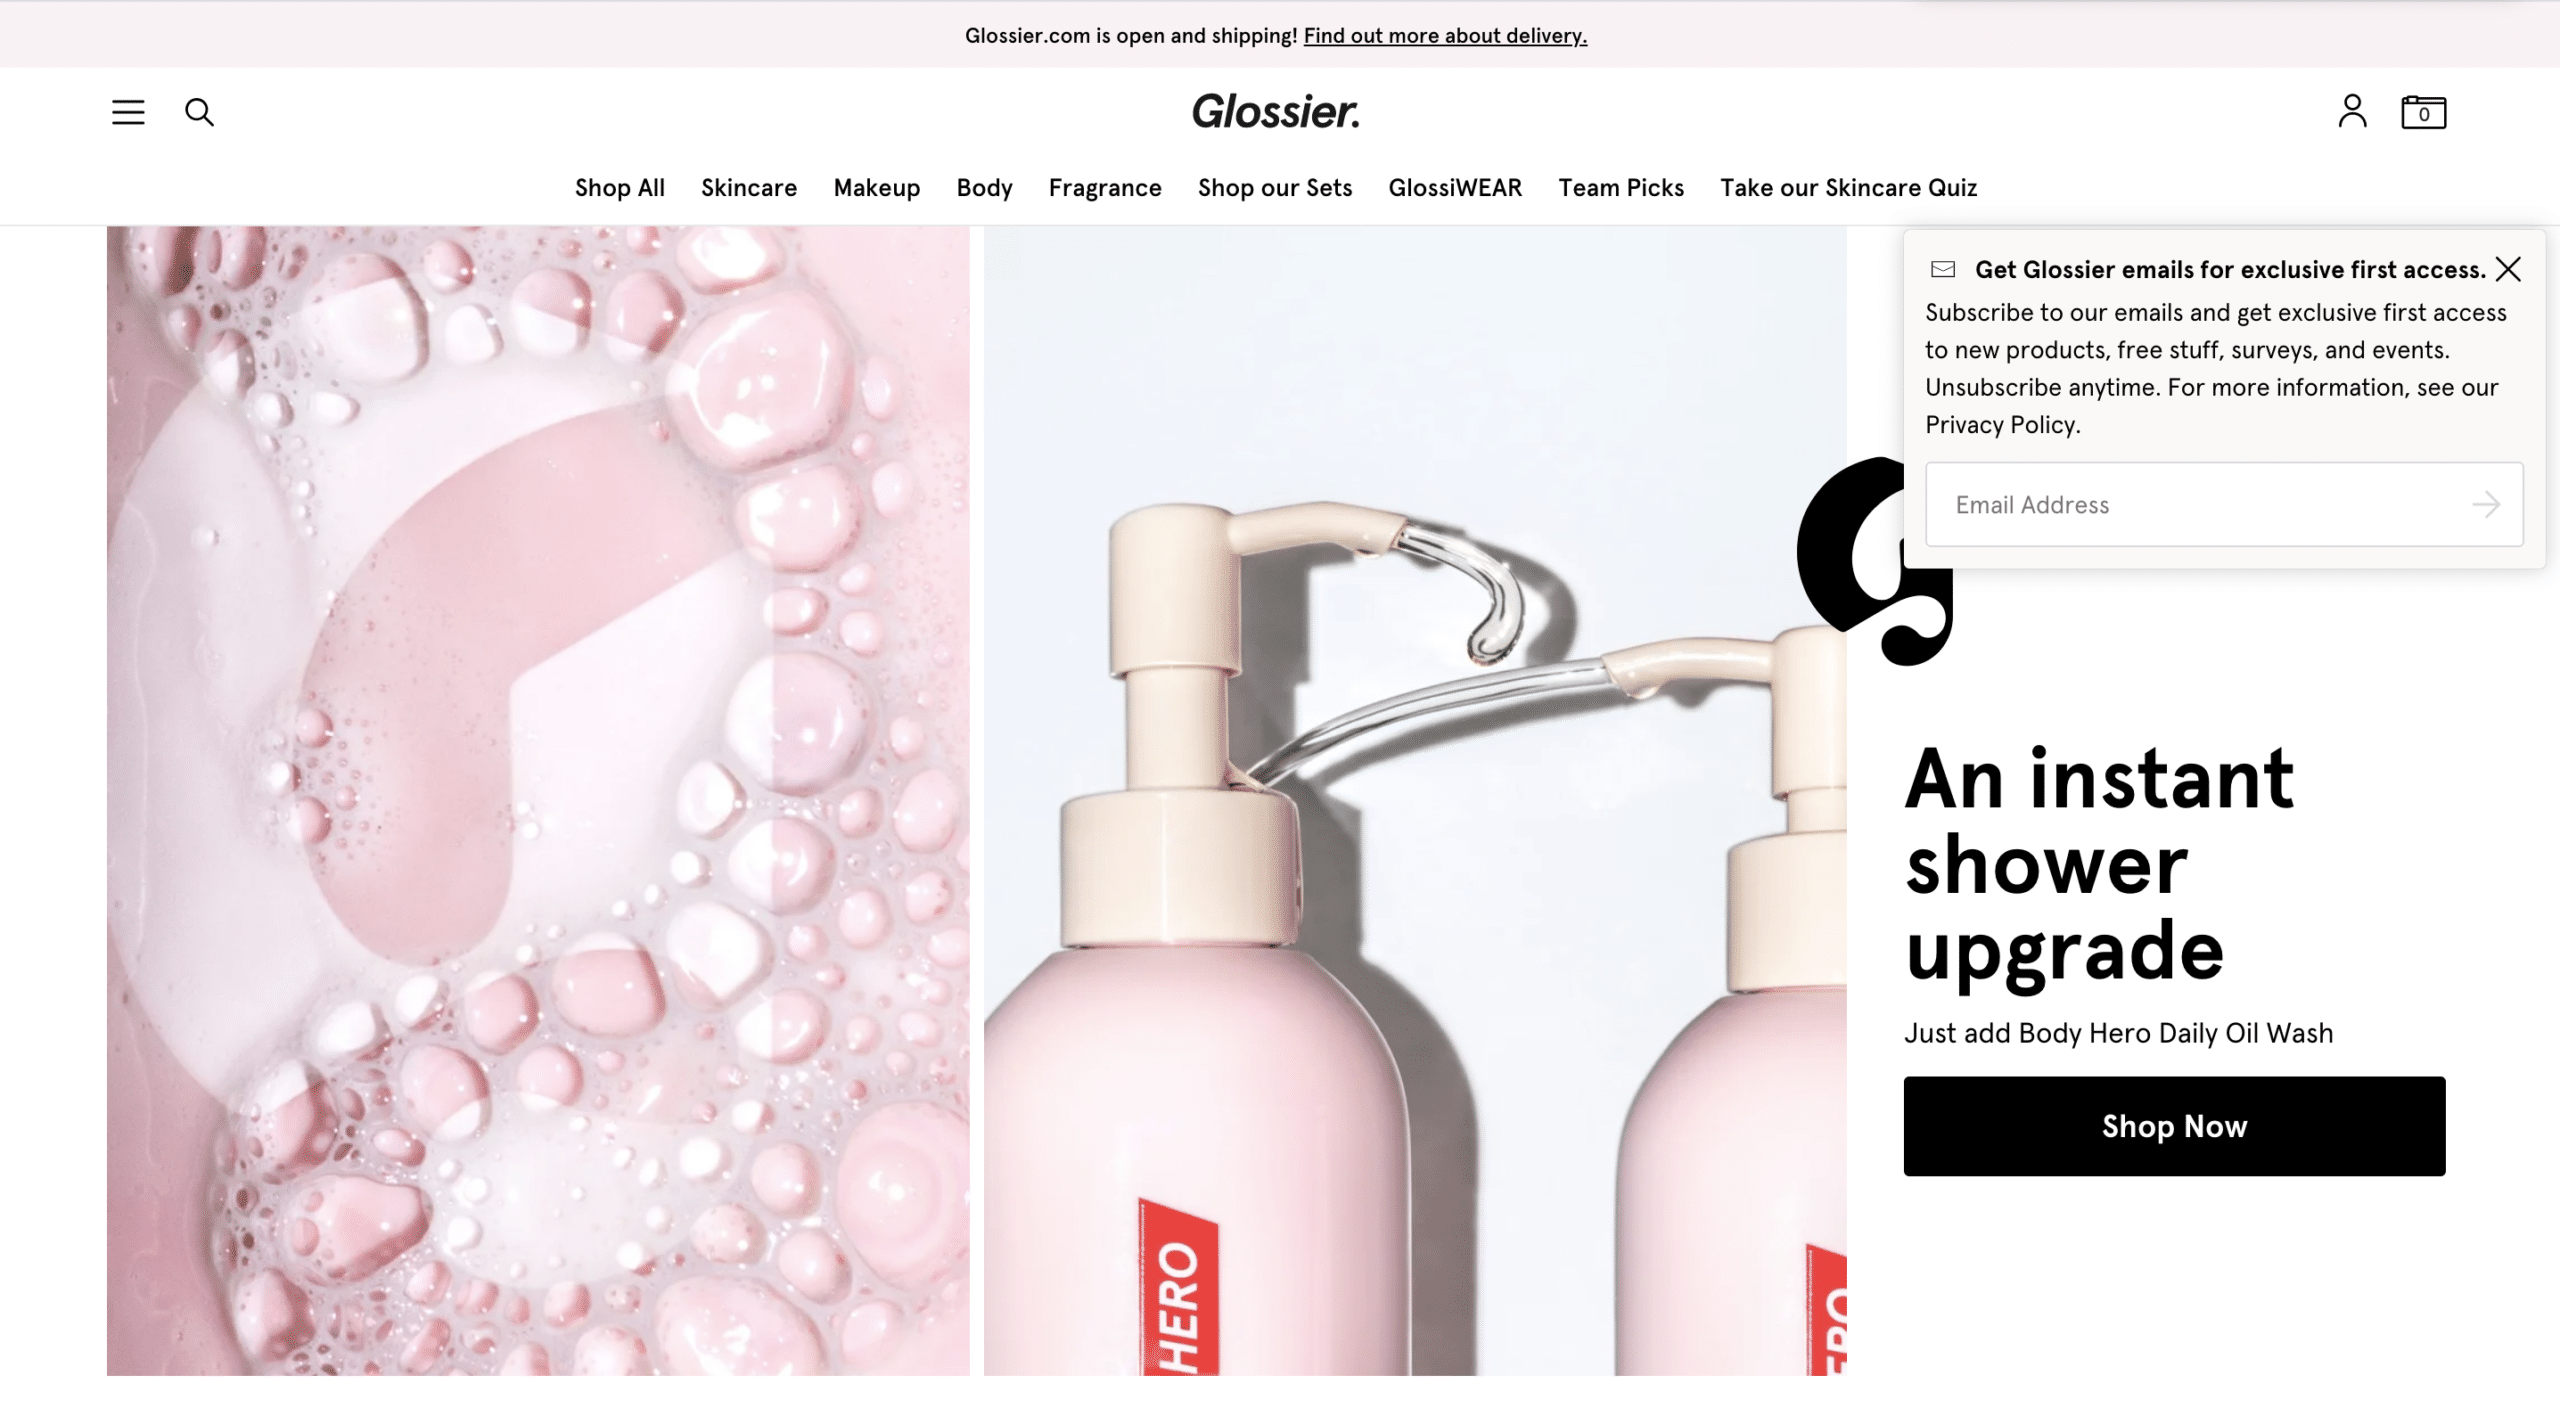 Glossier's lightbox is small and unobtrusive.